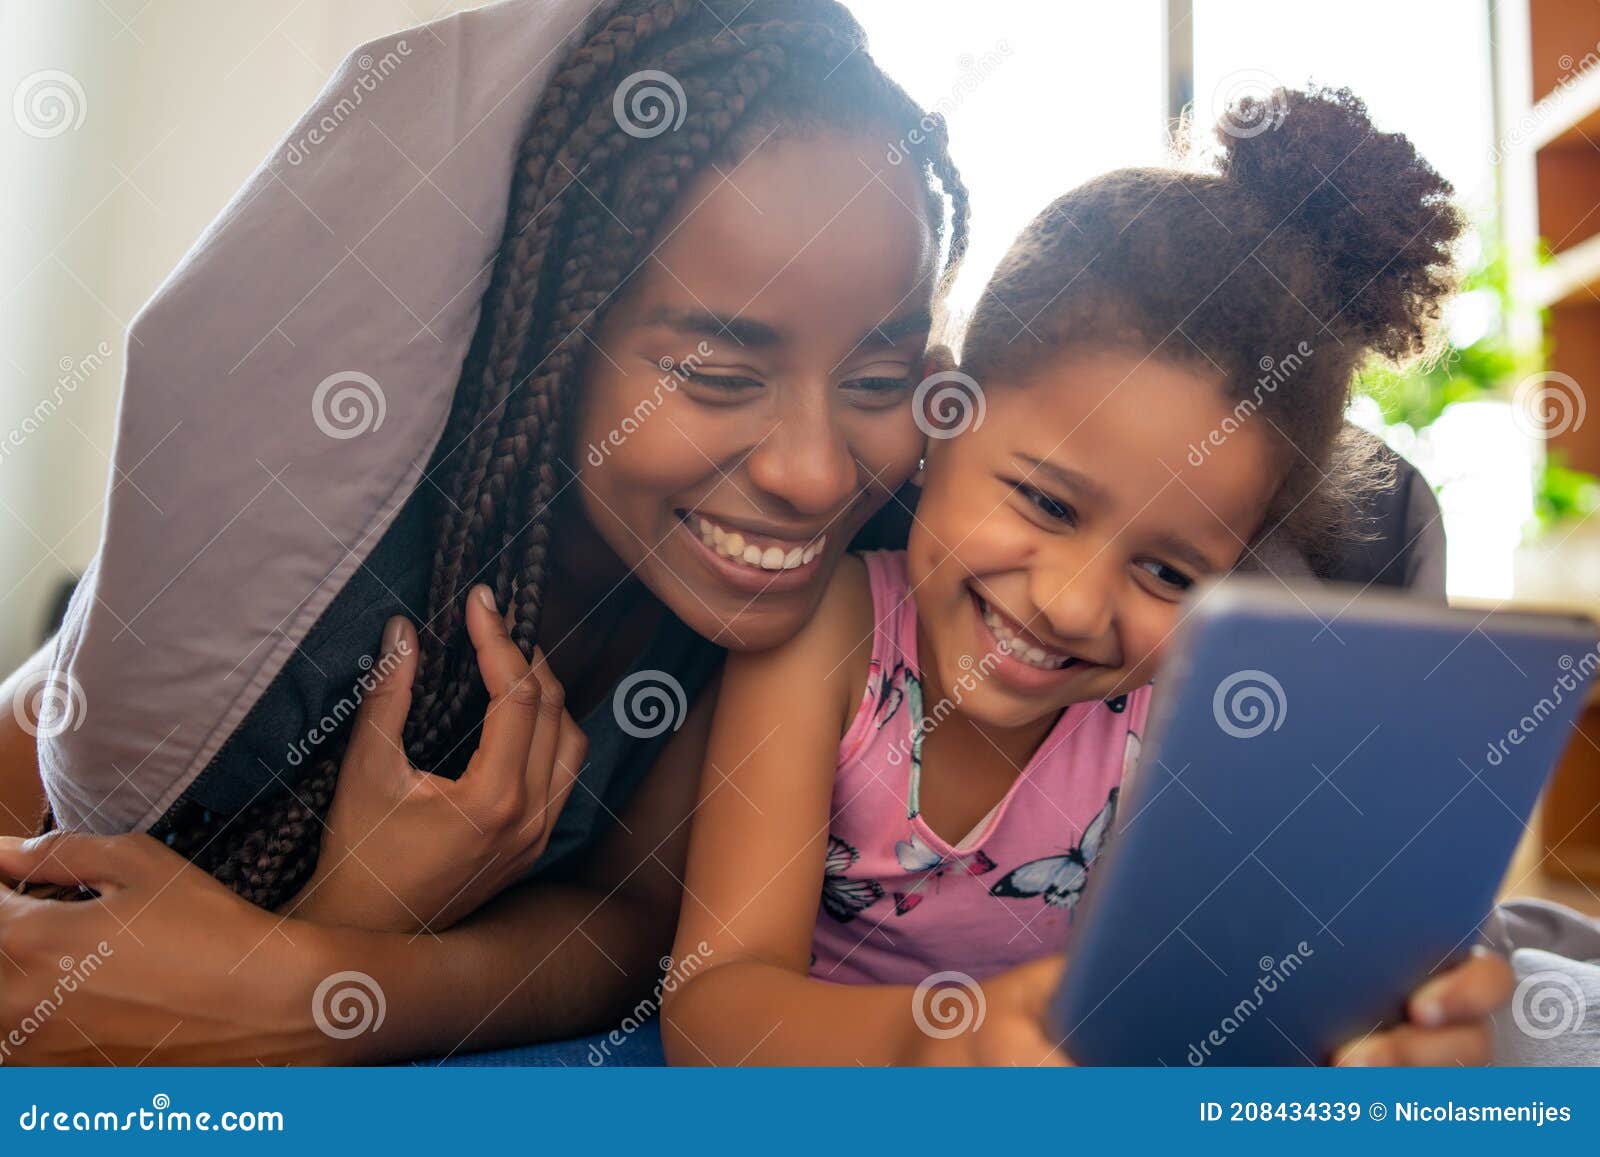 mother and daughter using digital tablet at home.